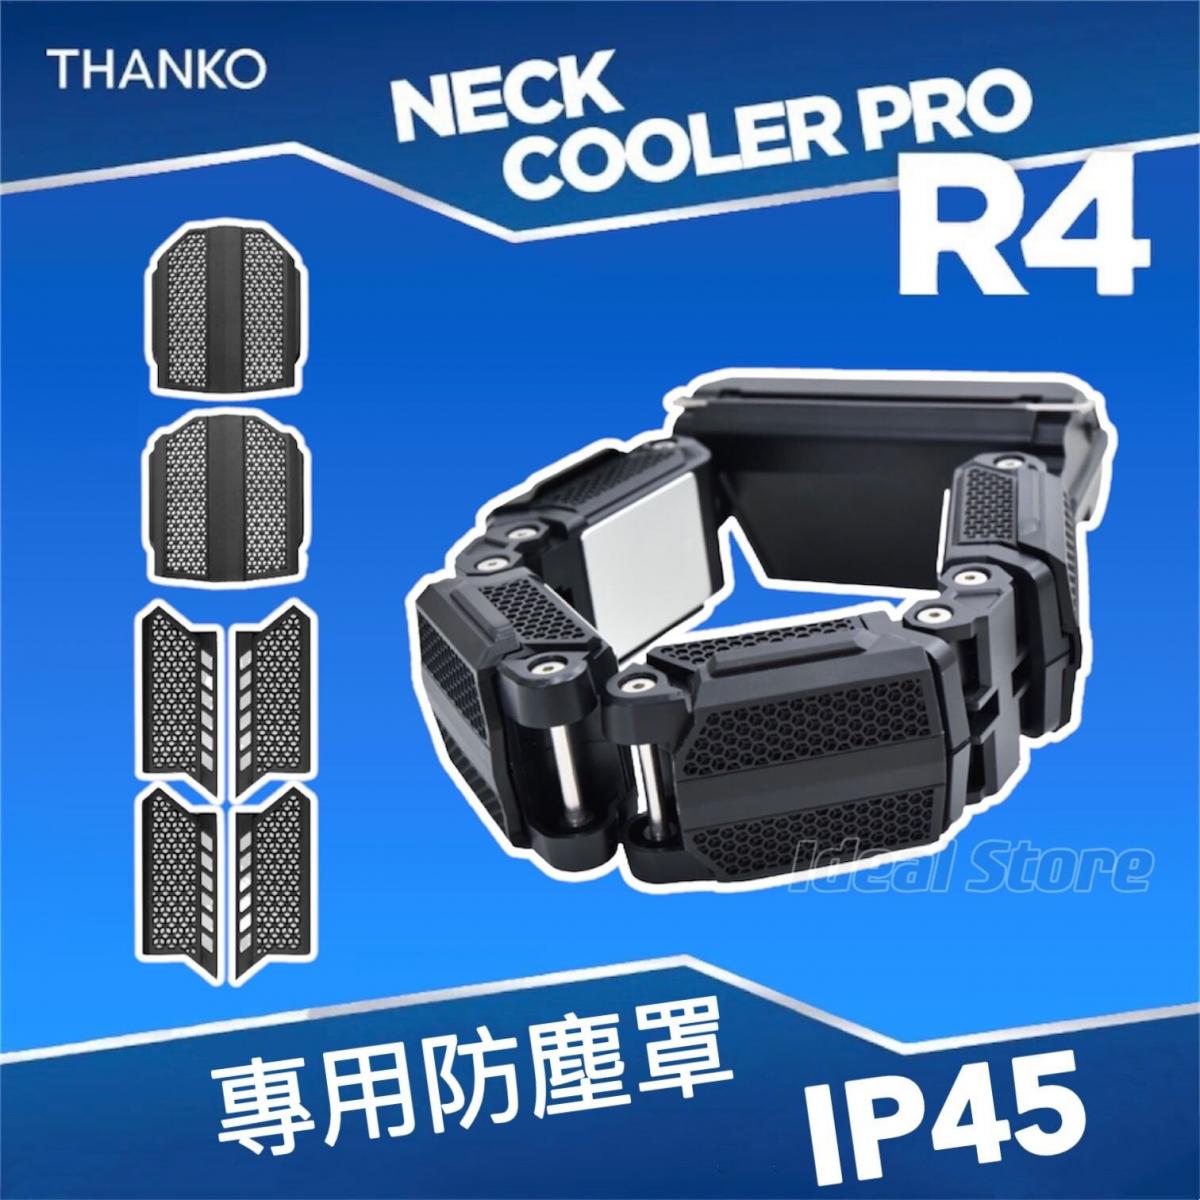 Thanko - Neck Cooler Pro R4 special dust cover｜neck hanging type｜IP45｜dustproof and waterproof